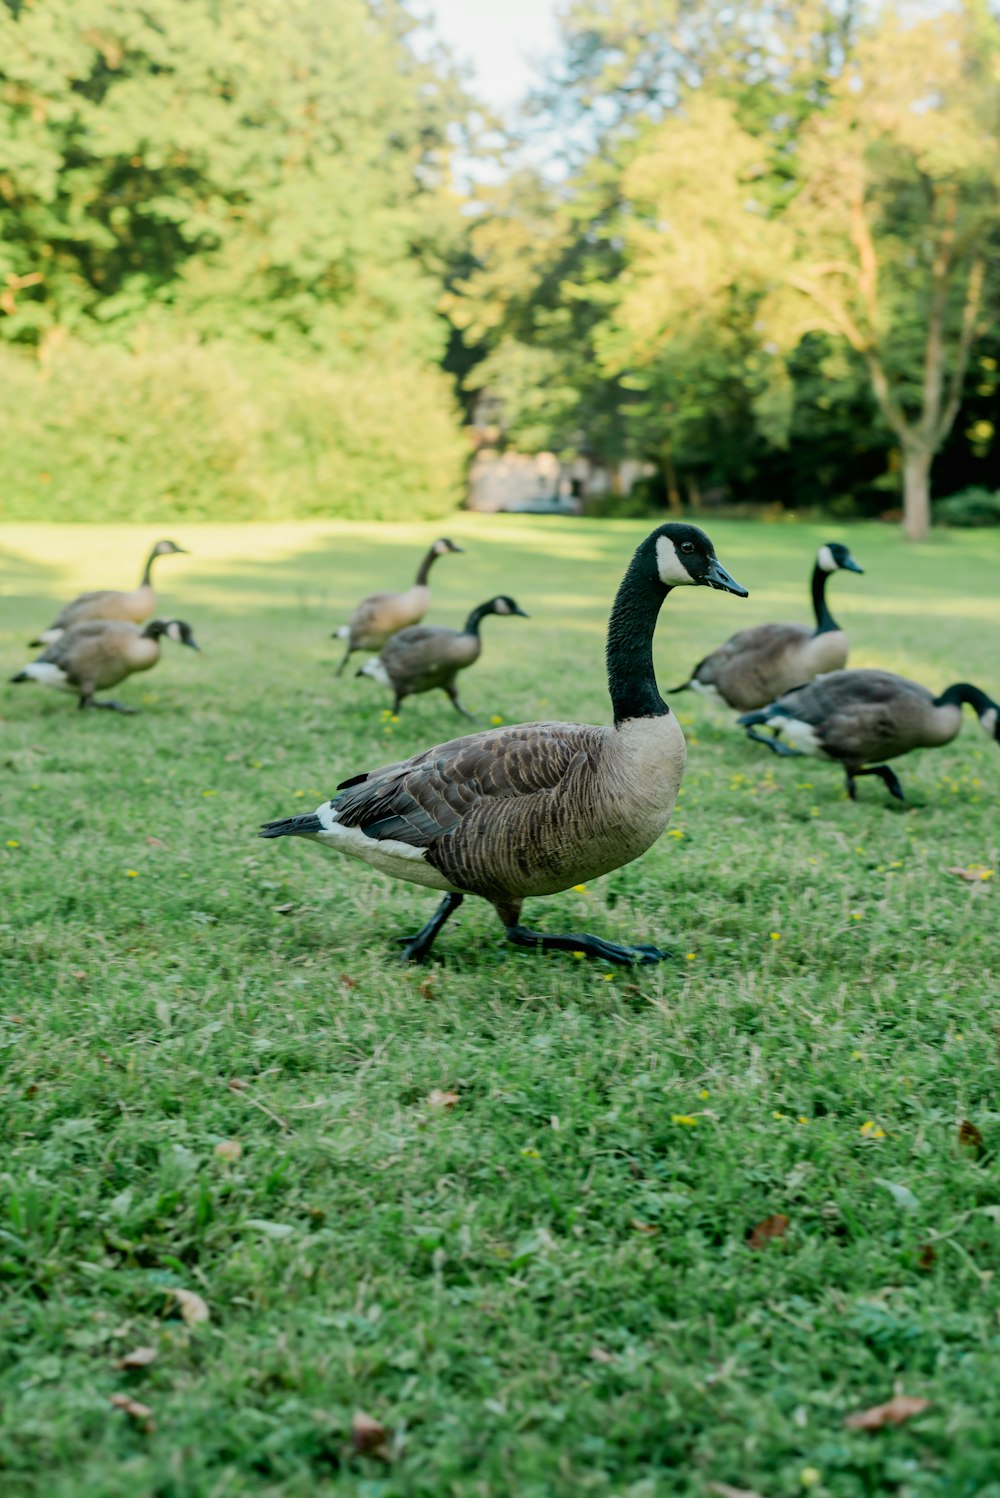 a group of geese walking on grass